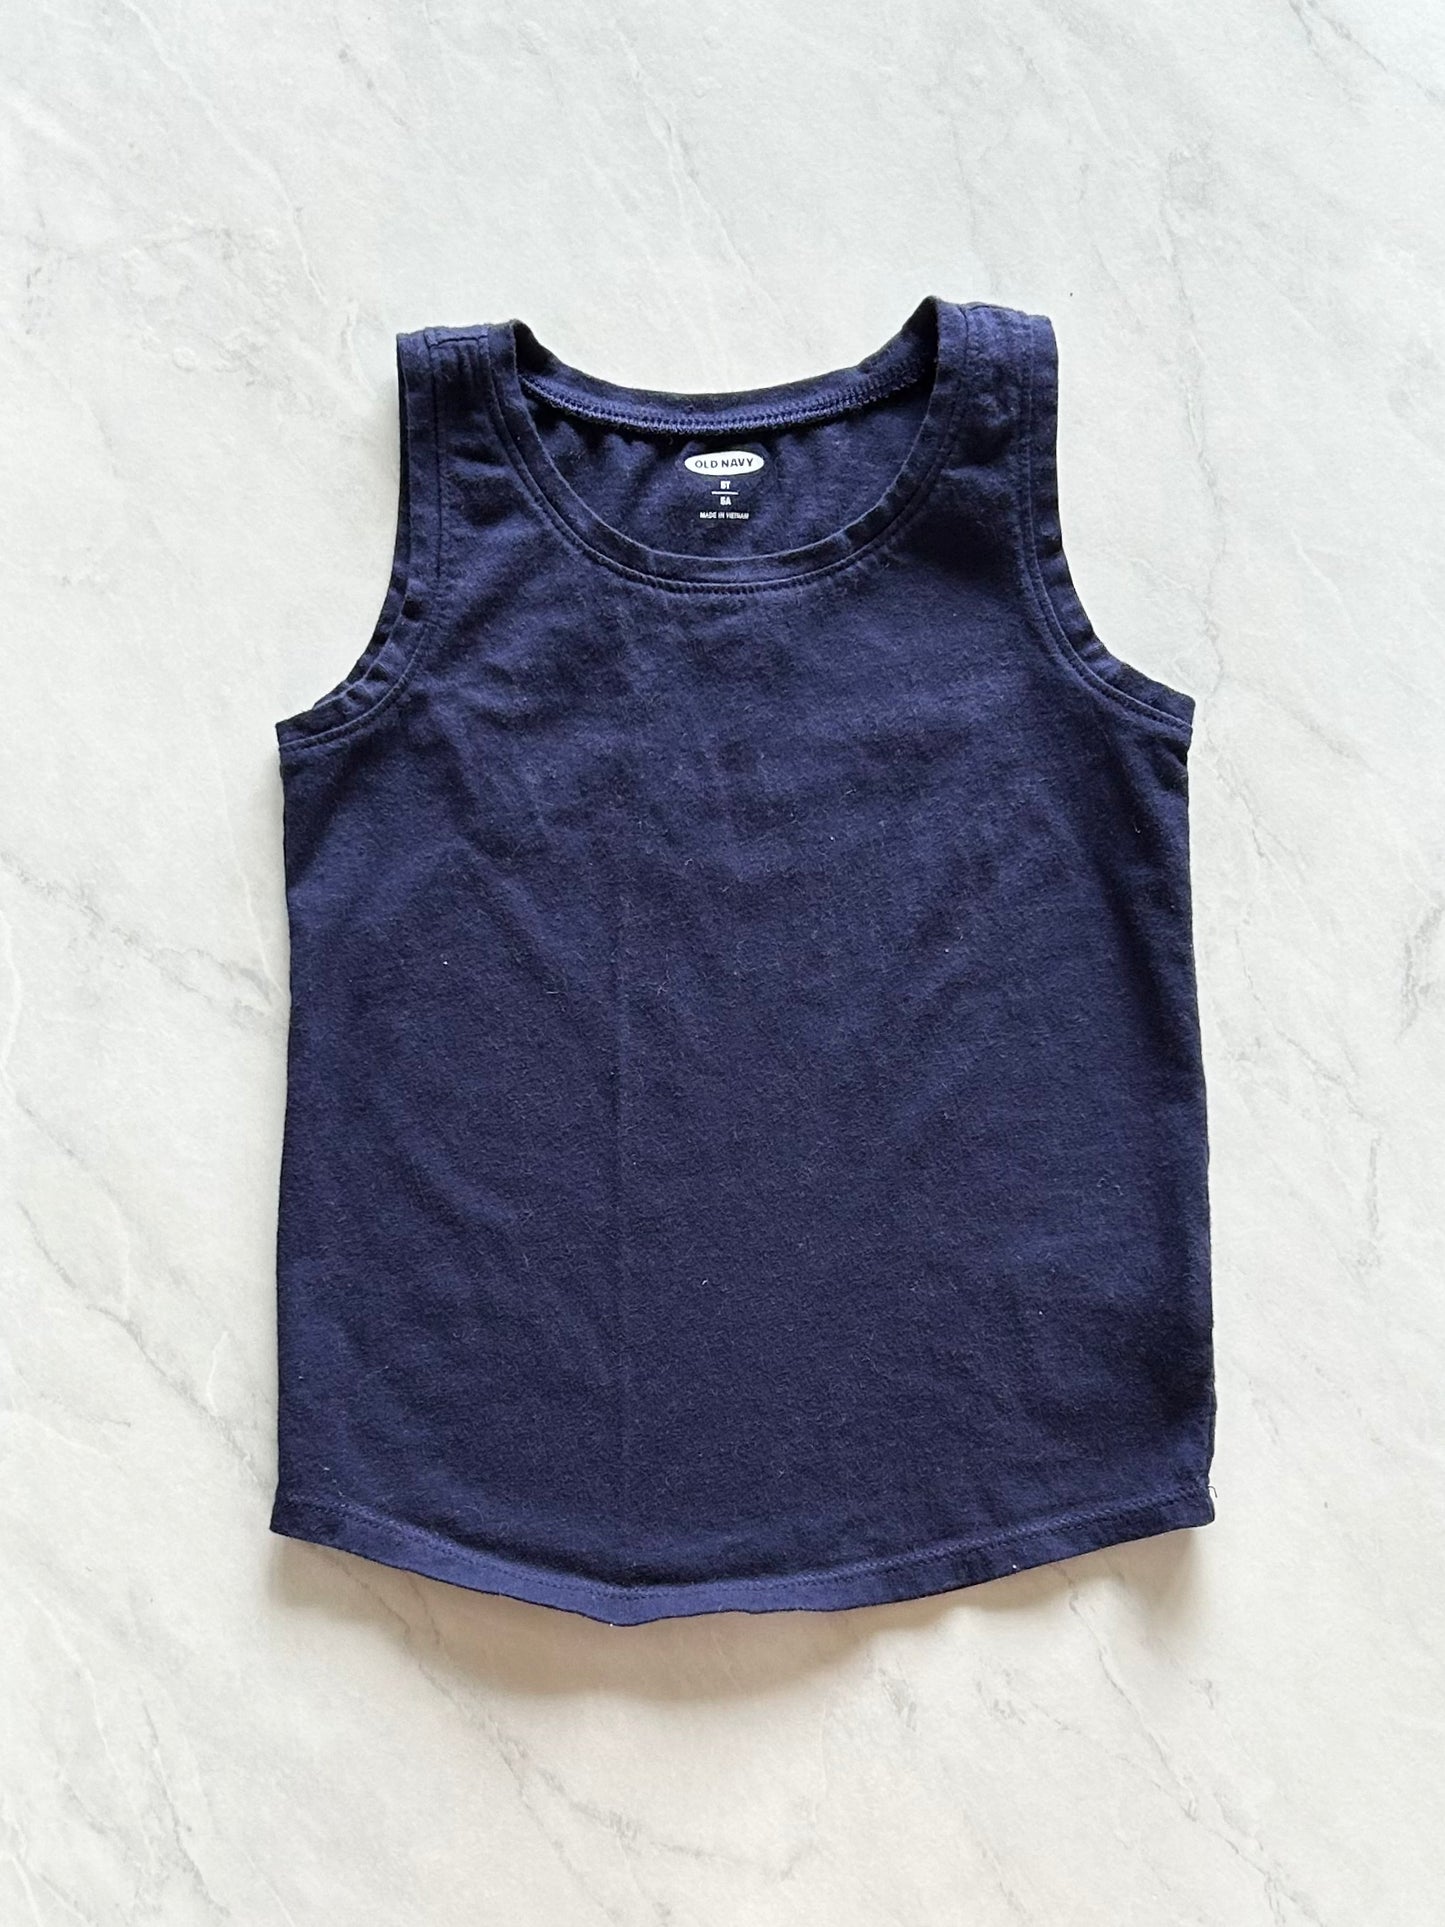 Camisole - Old navy - 5T